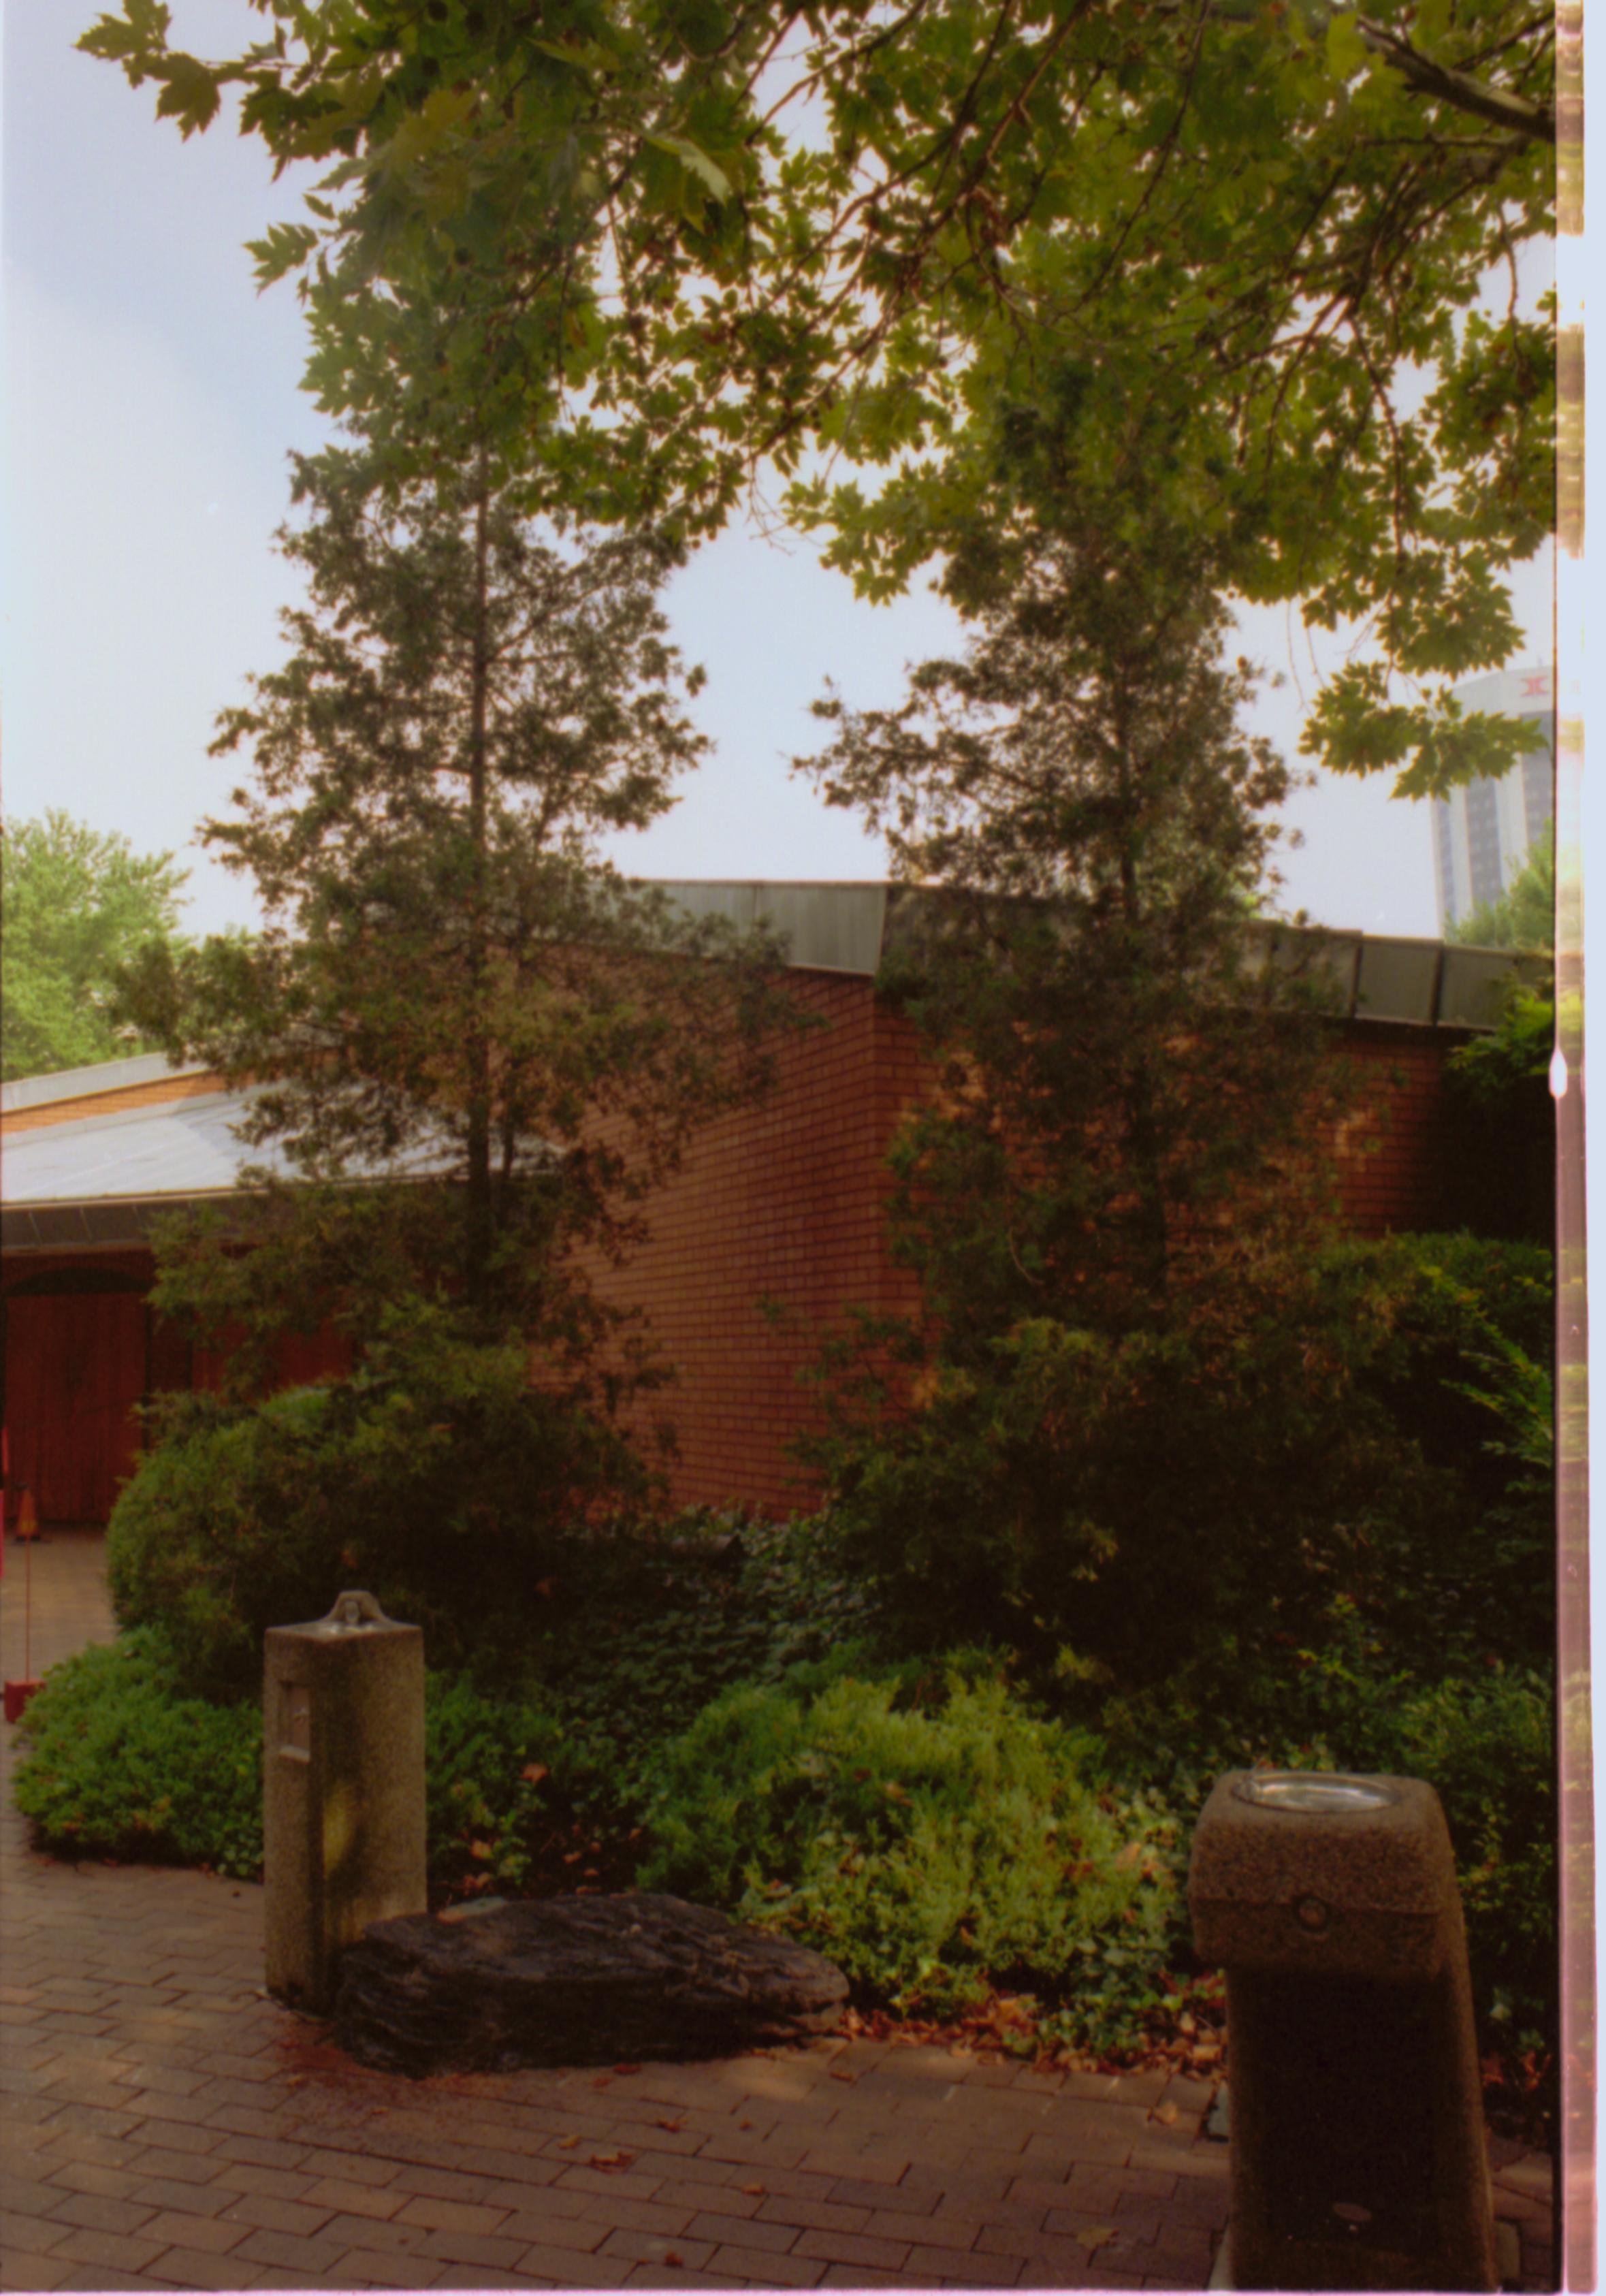 Plantings on south east side of Visitor Center, with water fountains in foreground. Photographer facing north.